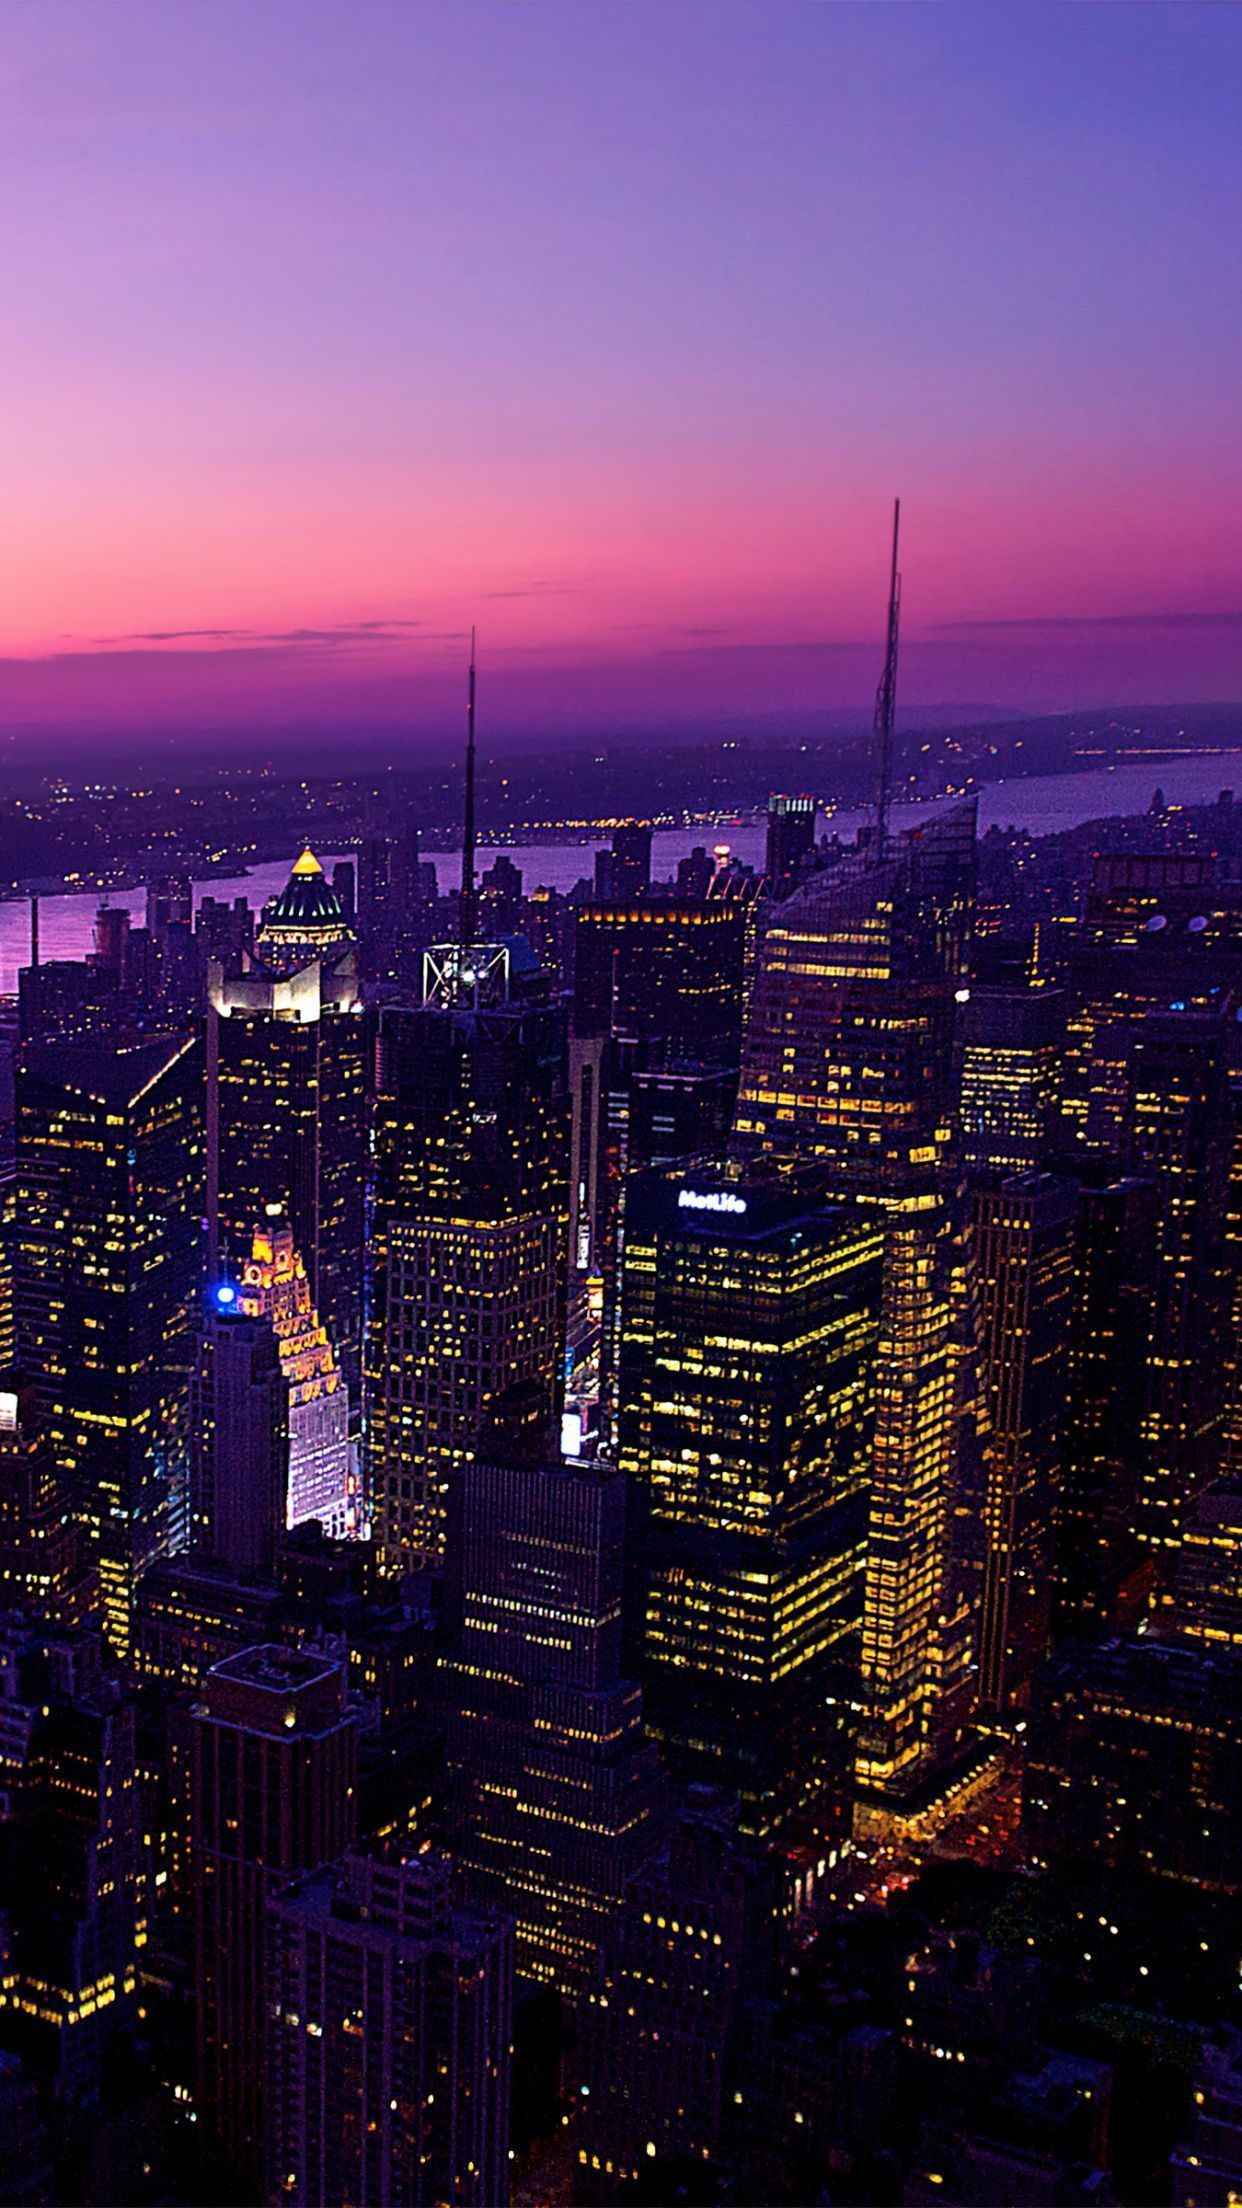 A city skyline at night with skyscrapers lit up in purple and pink hues. - New York